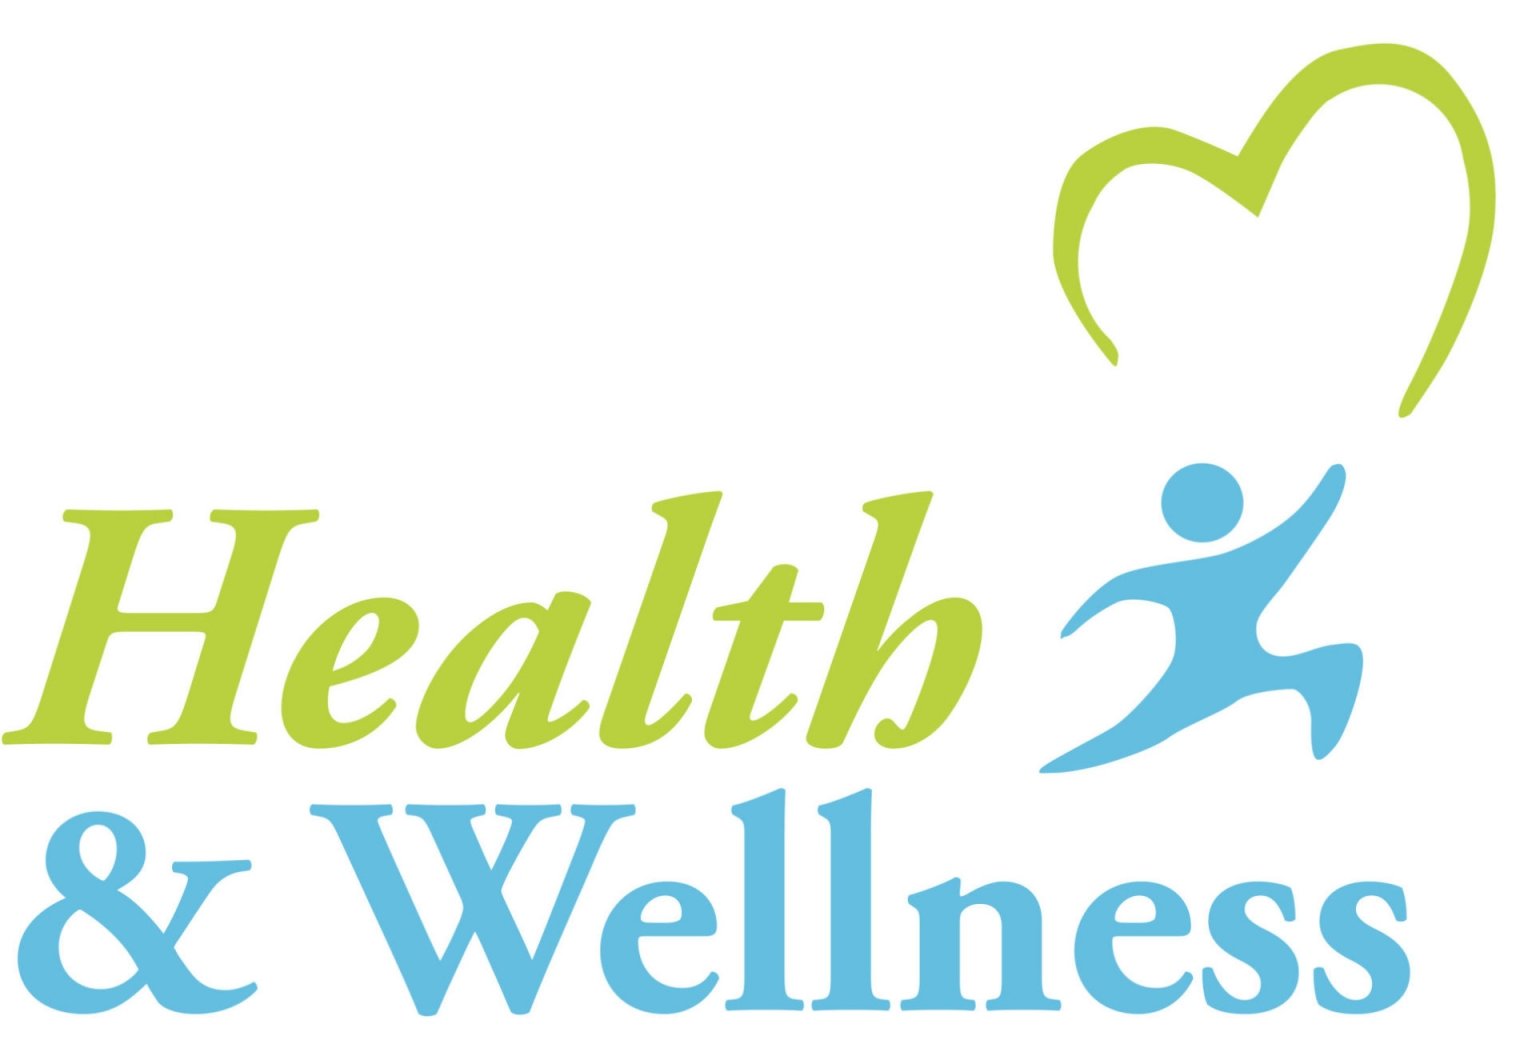 Why Employee Health and Wellbeing Programs Are Important for Business Success?